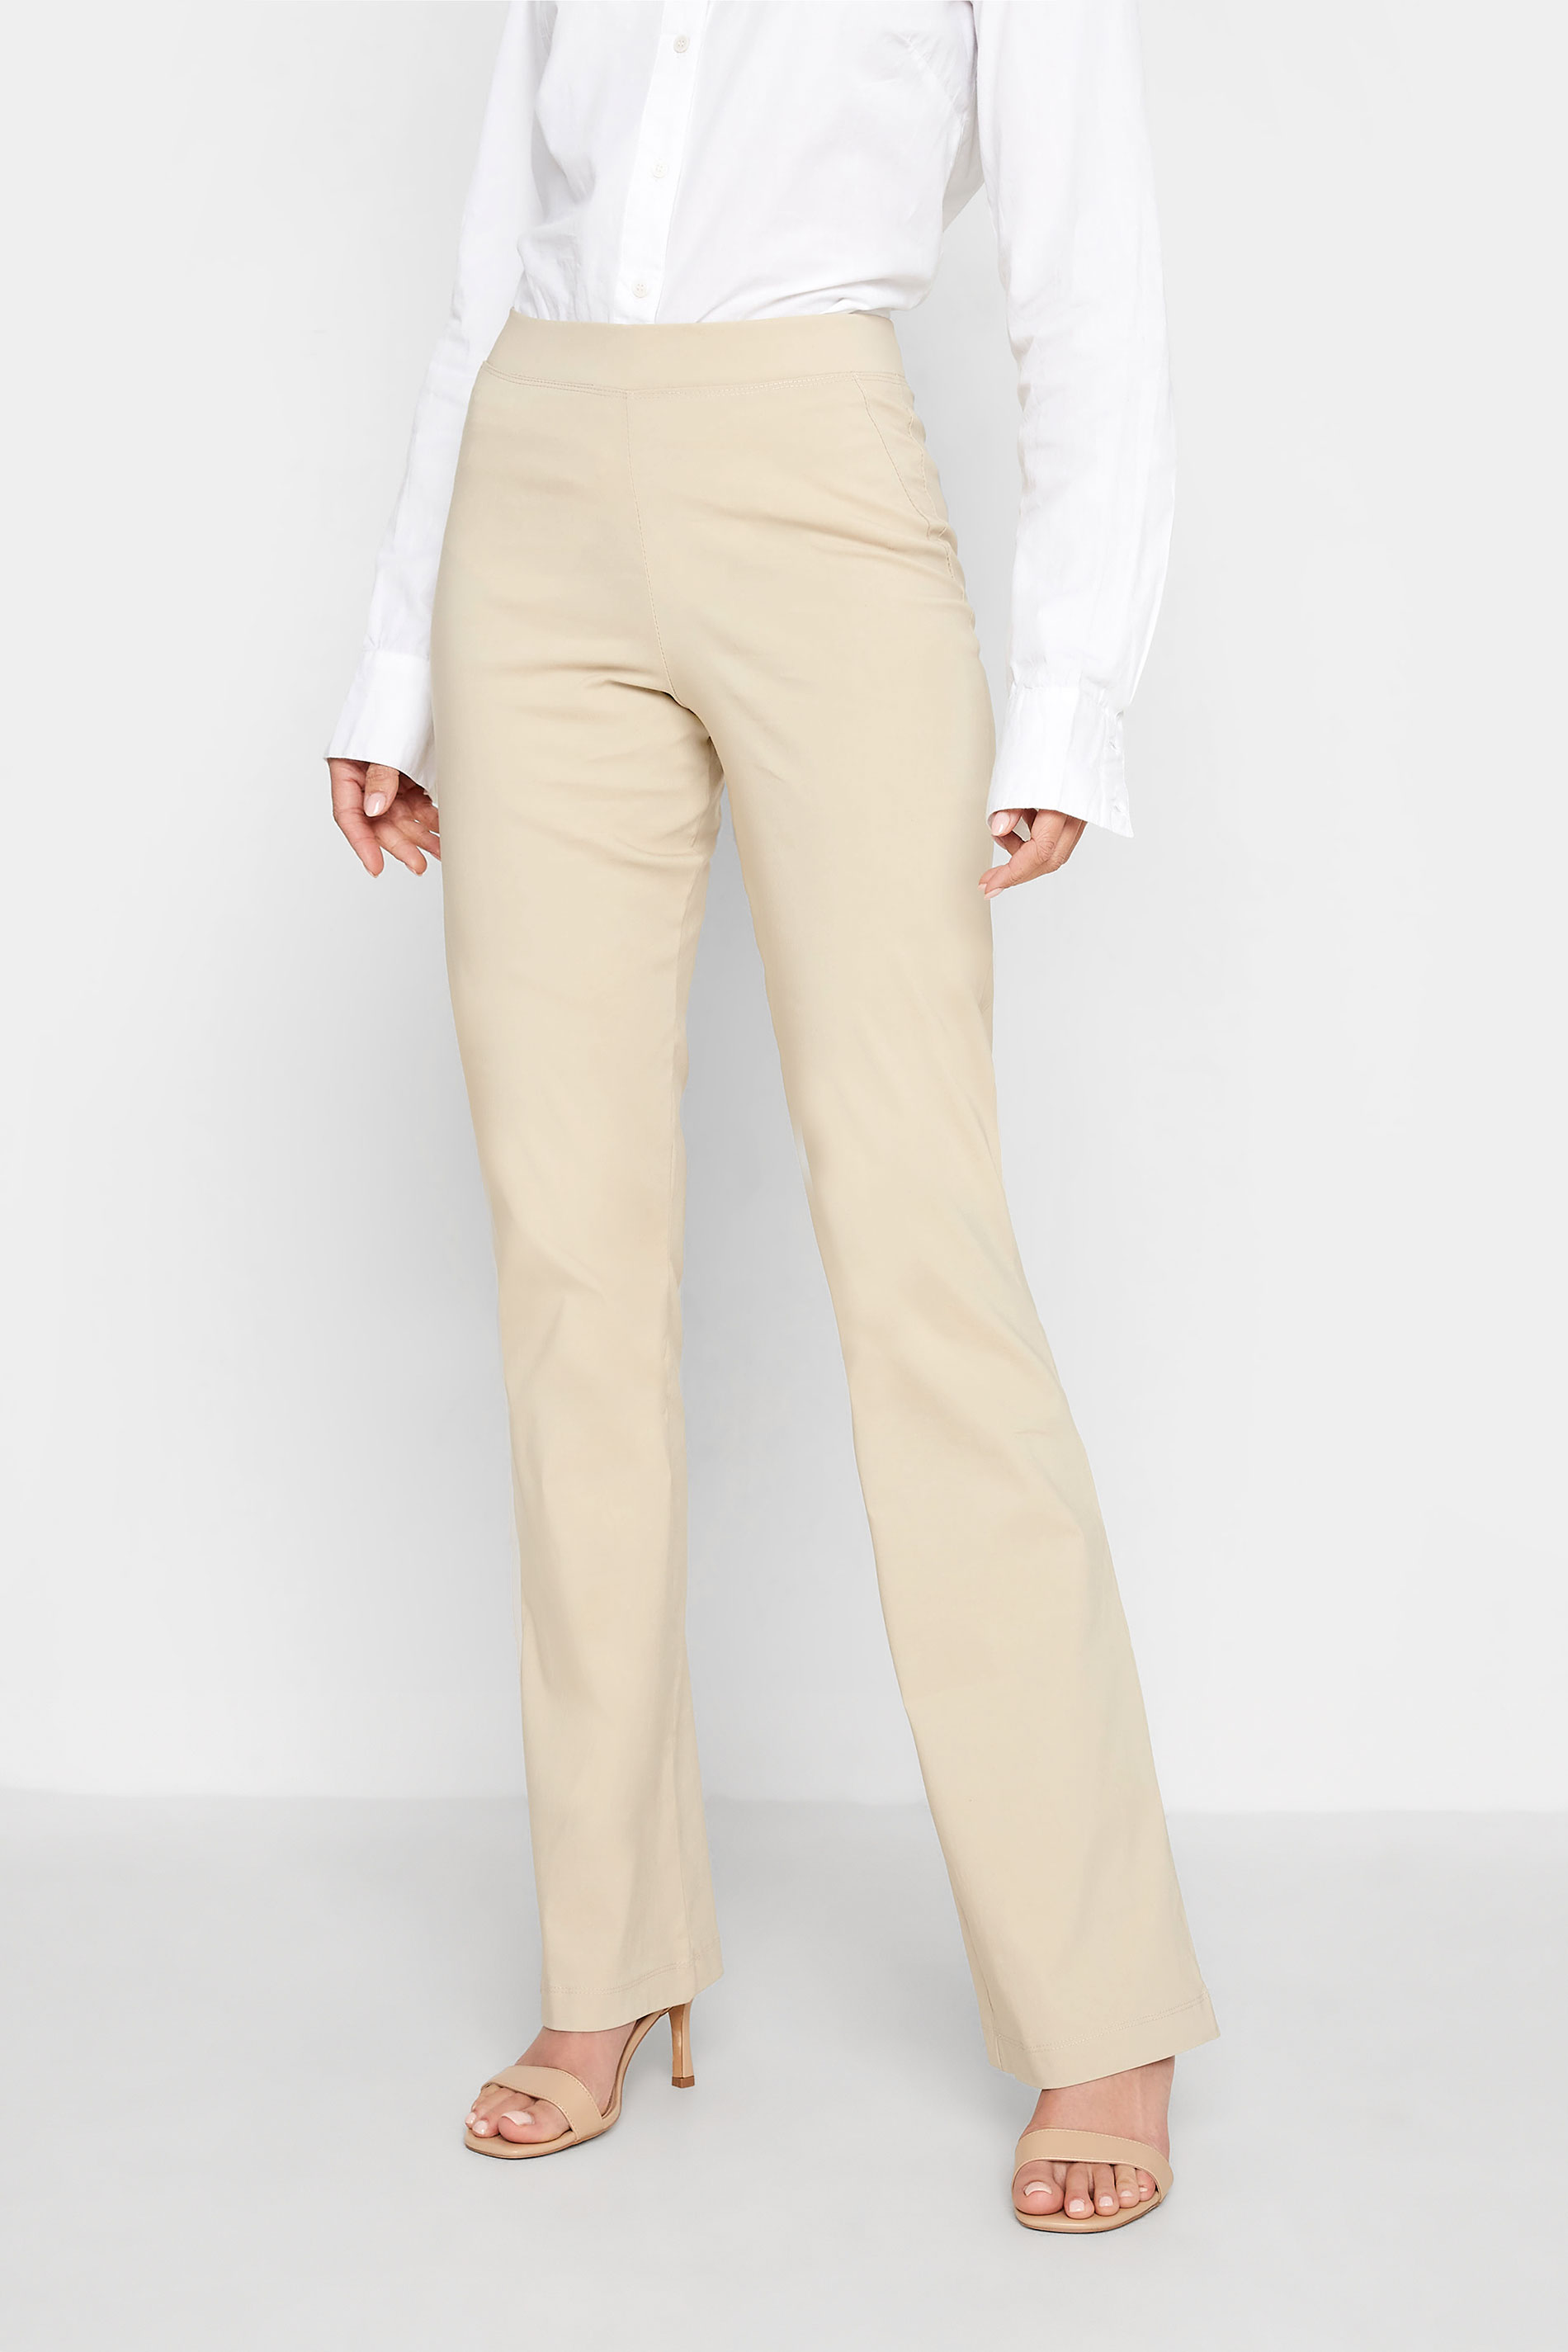 LTS Tall Beige Brown Stretch Bootcut Trousers 1